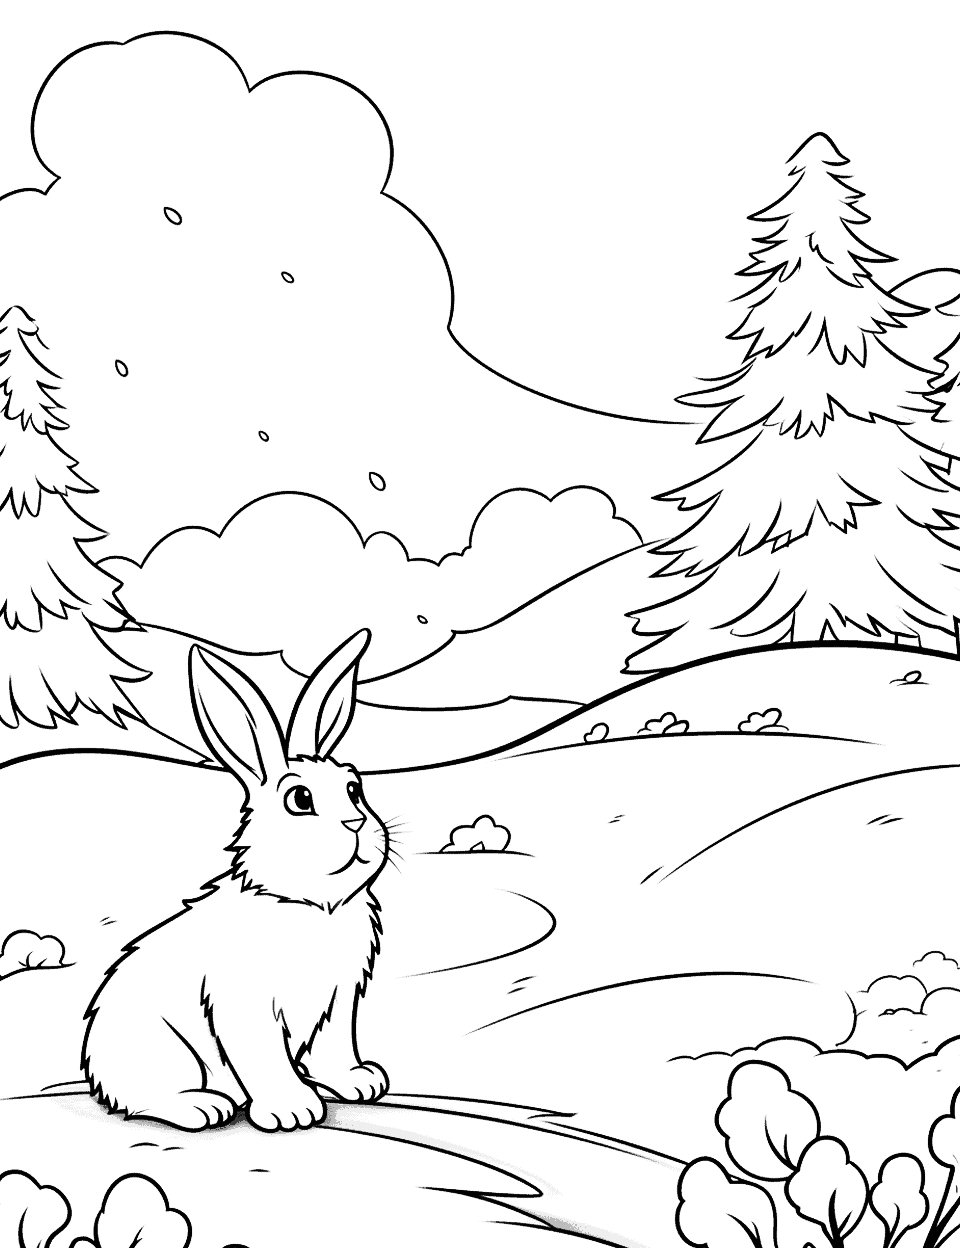 Winter Wonderland and Bunny  Coloring Page - A serene snow-filled scene with a bunny sitting in the snow.